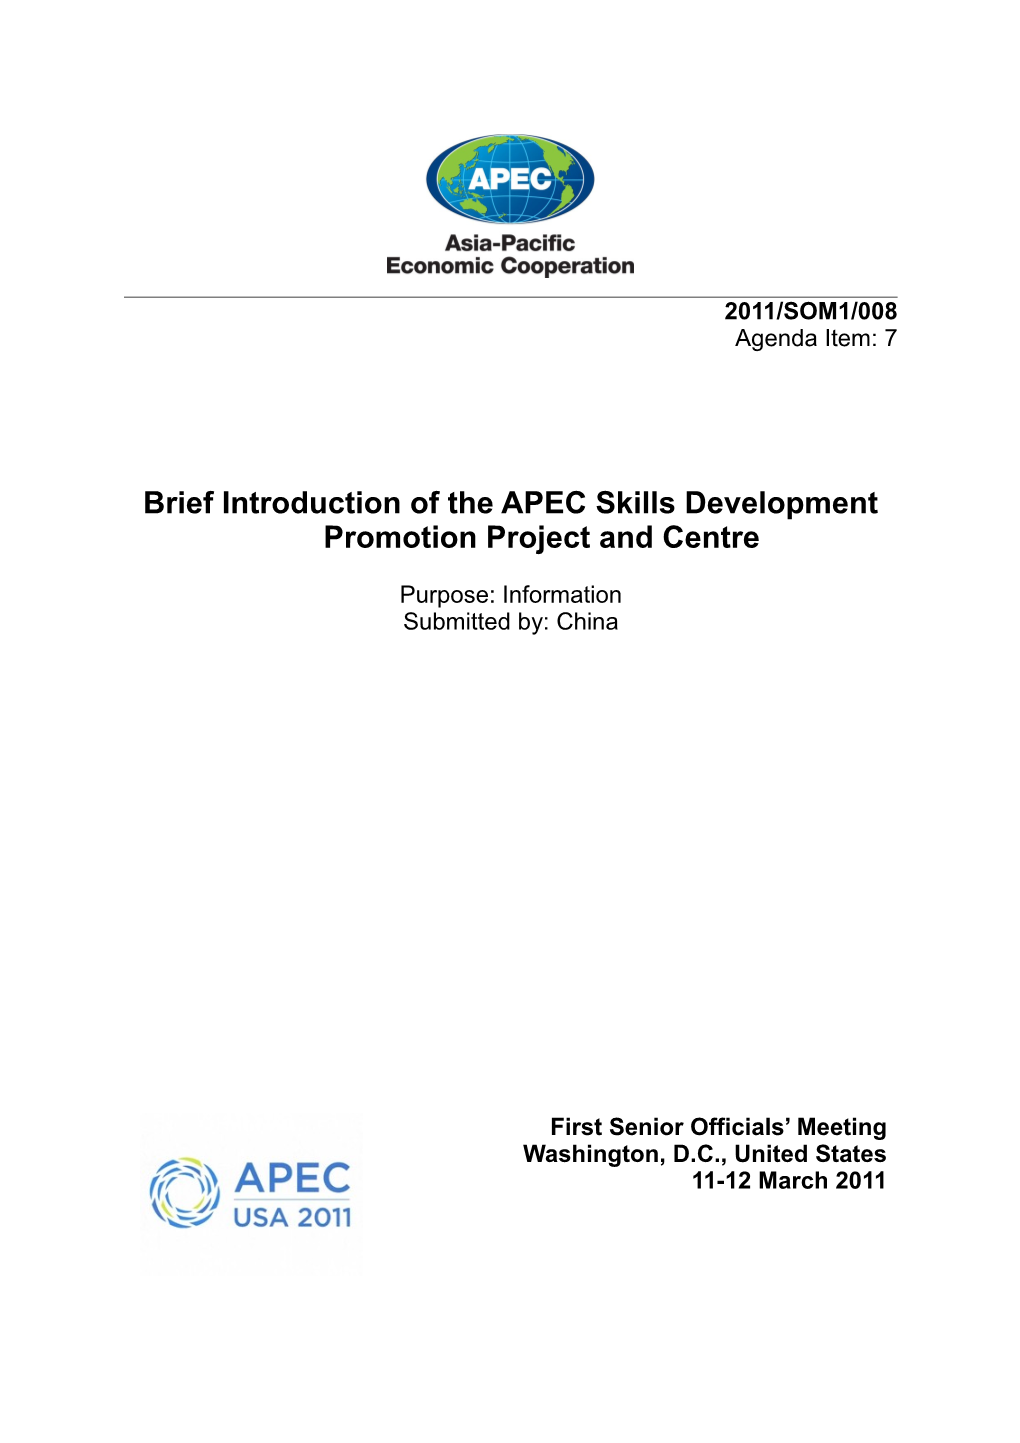 Information on the APEC Skills Development Promotion Project and Centre